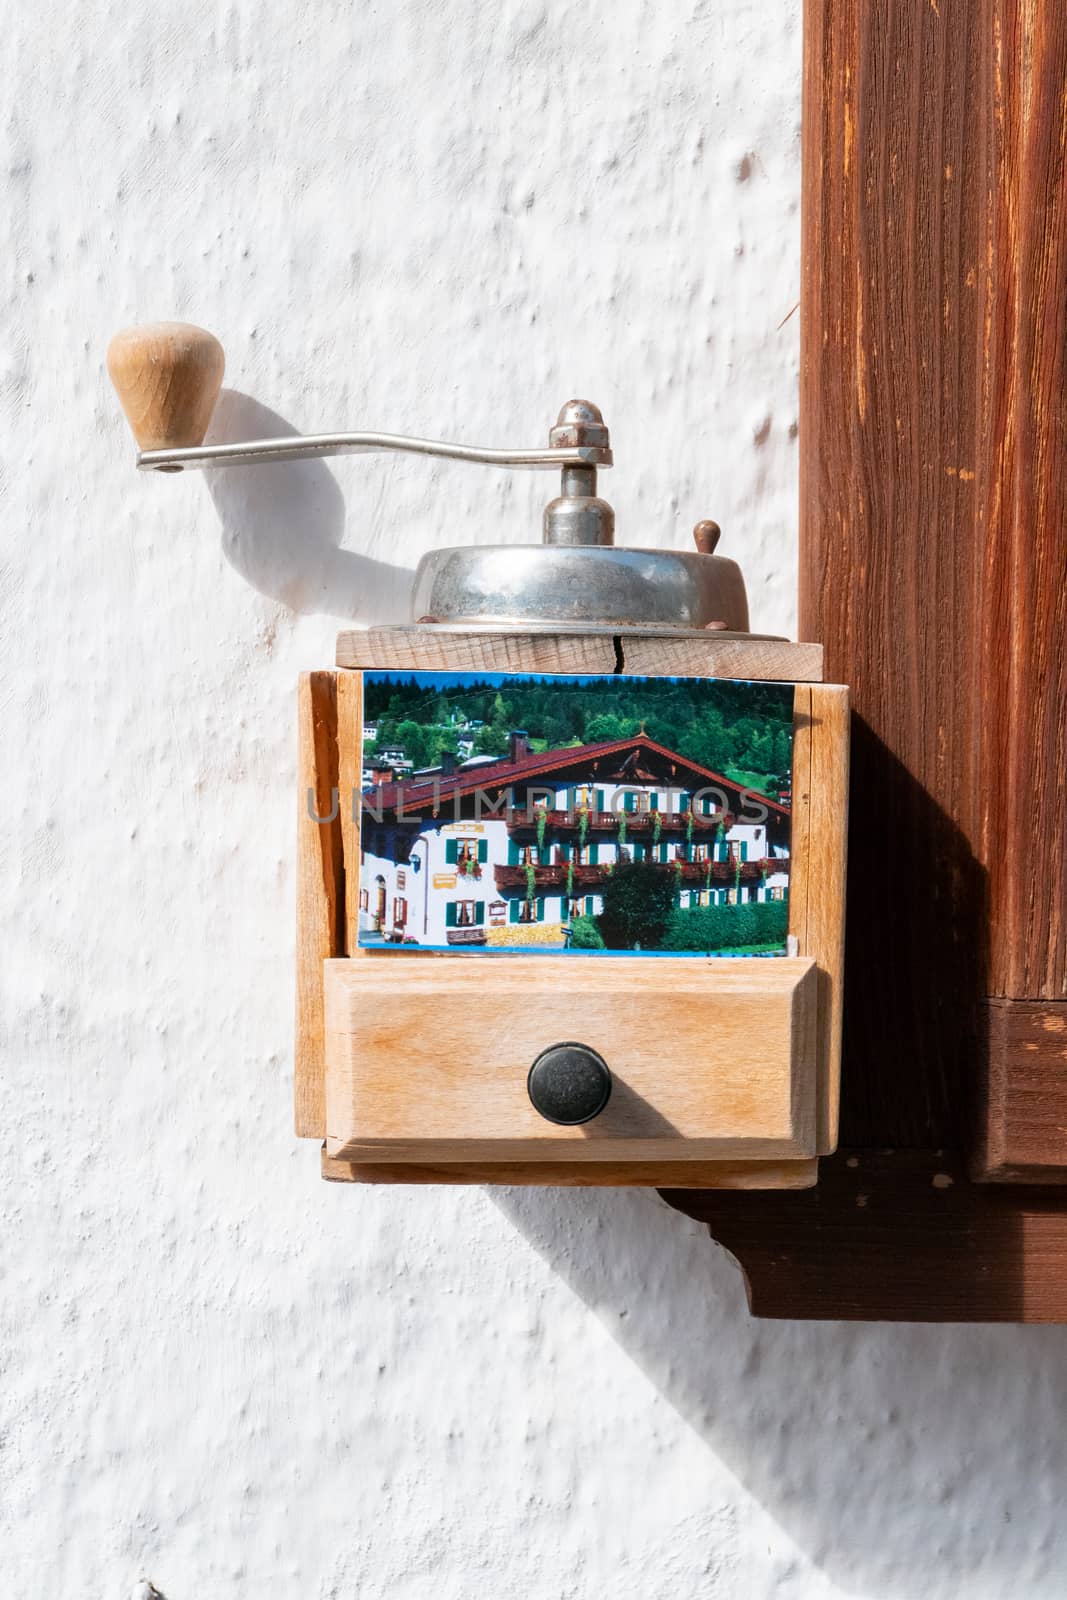 An old hand-operated coffee grinder on a wall of a hotel or pension, which is equipped with business cards to remove.